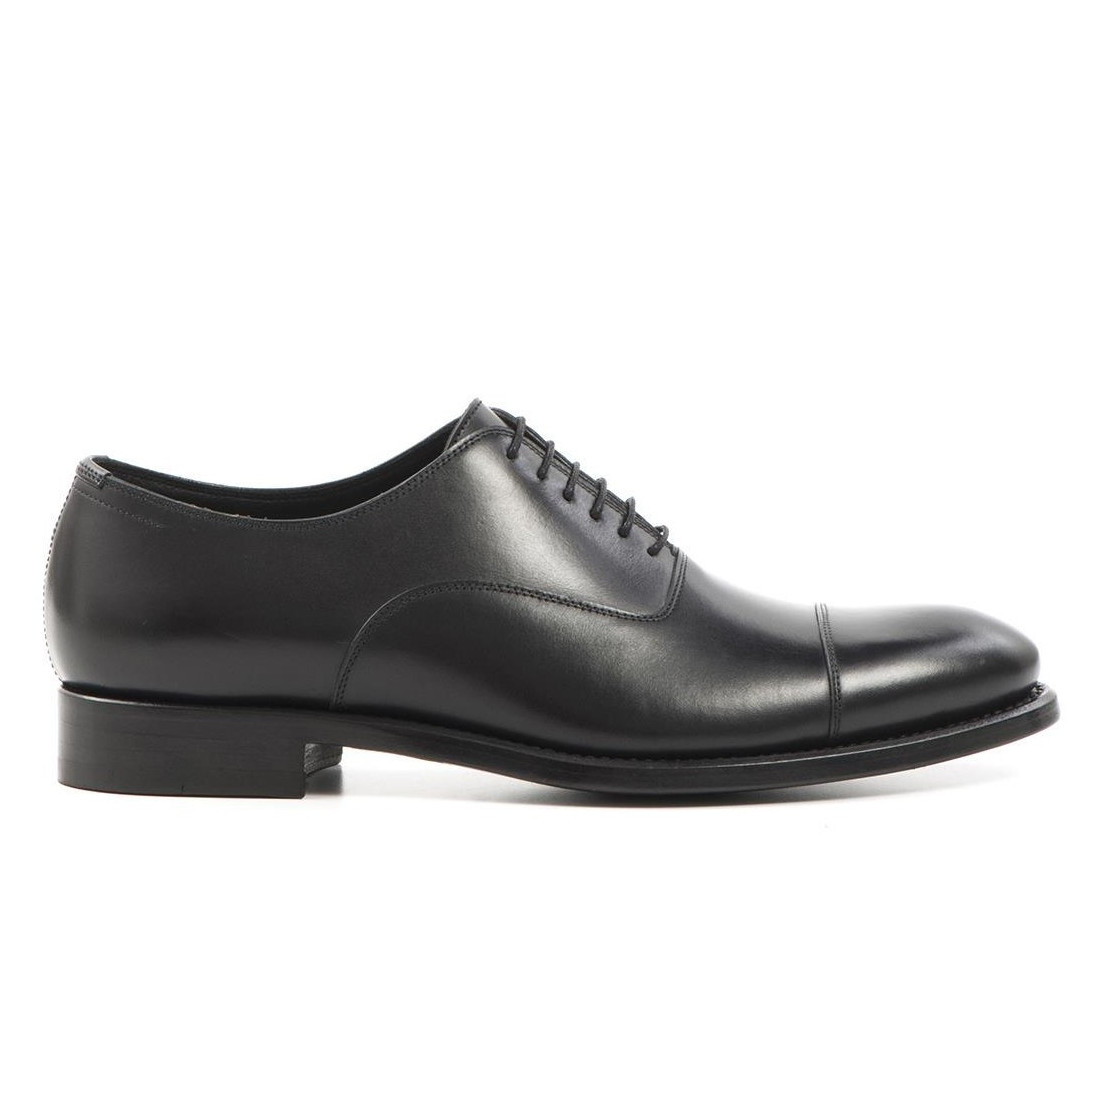 Men's Jerold Wilton oxford shoes in black leather